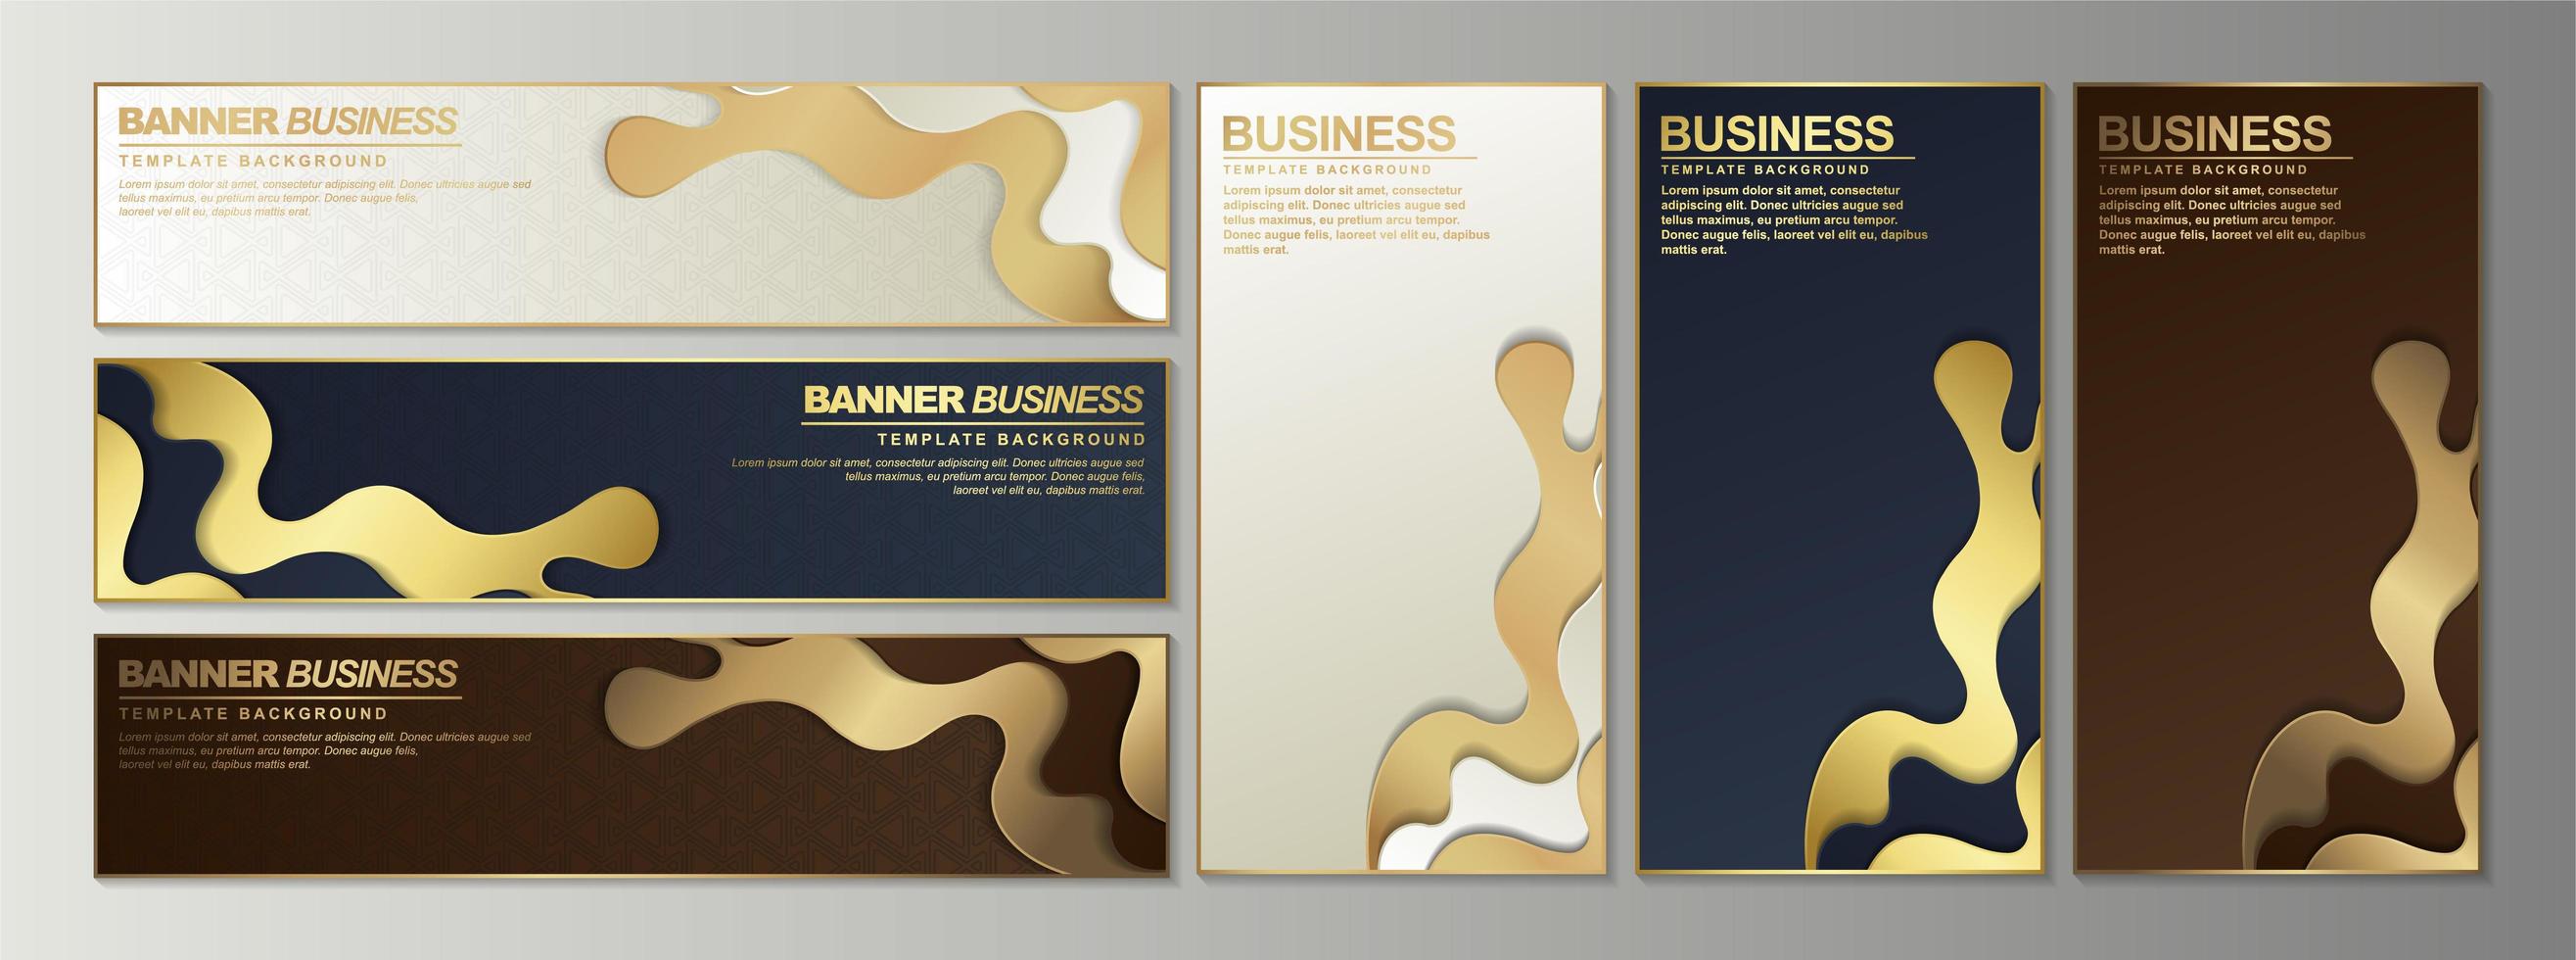 Luxury abstract banner design web template set vector